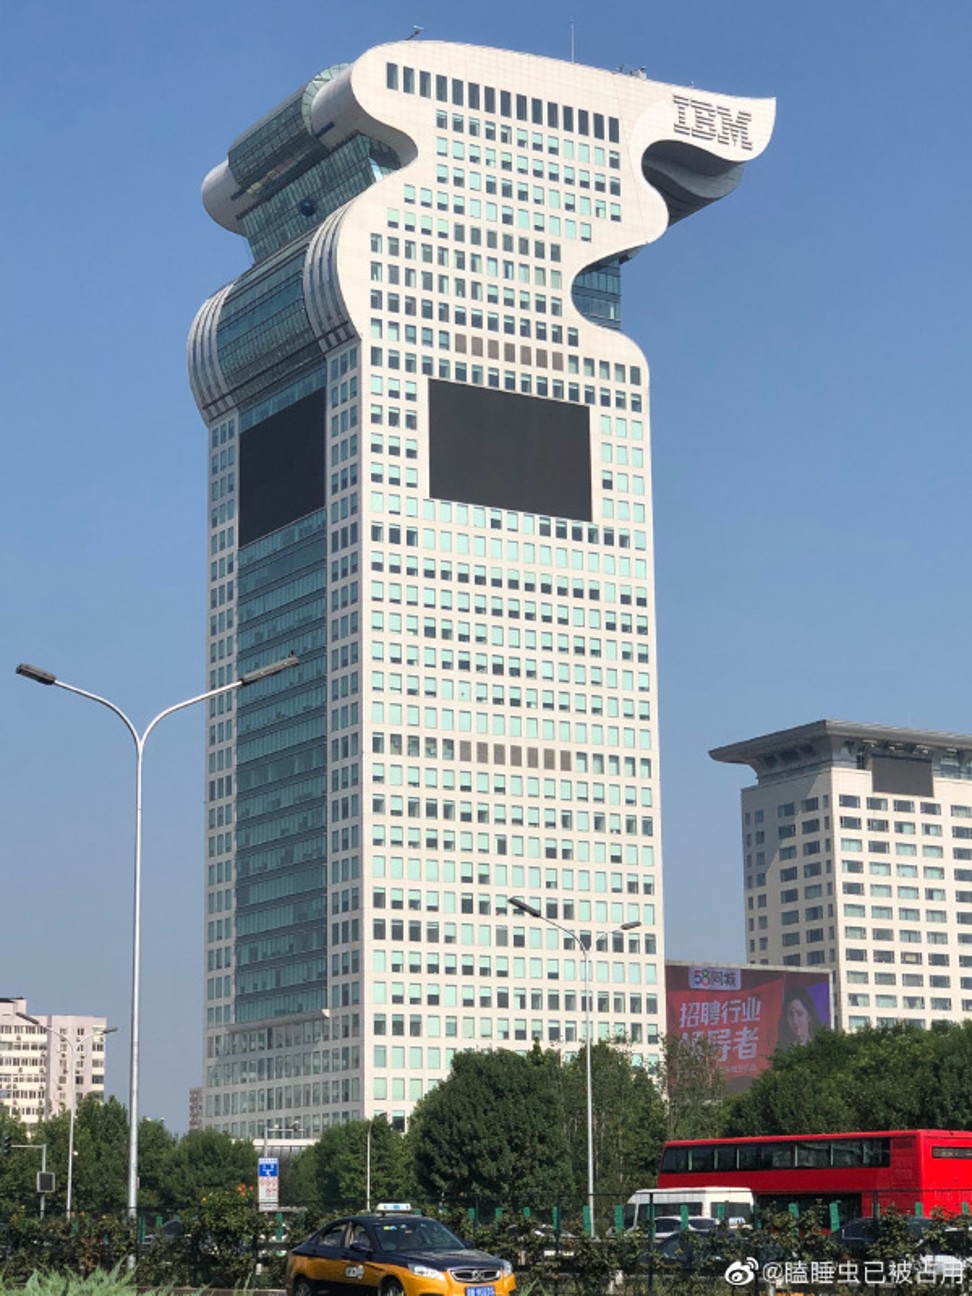 Pangu Plaza Tower 5, designed in the likeness of a dragon’s head. Photo: Weibo